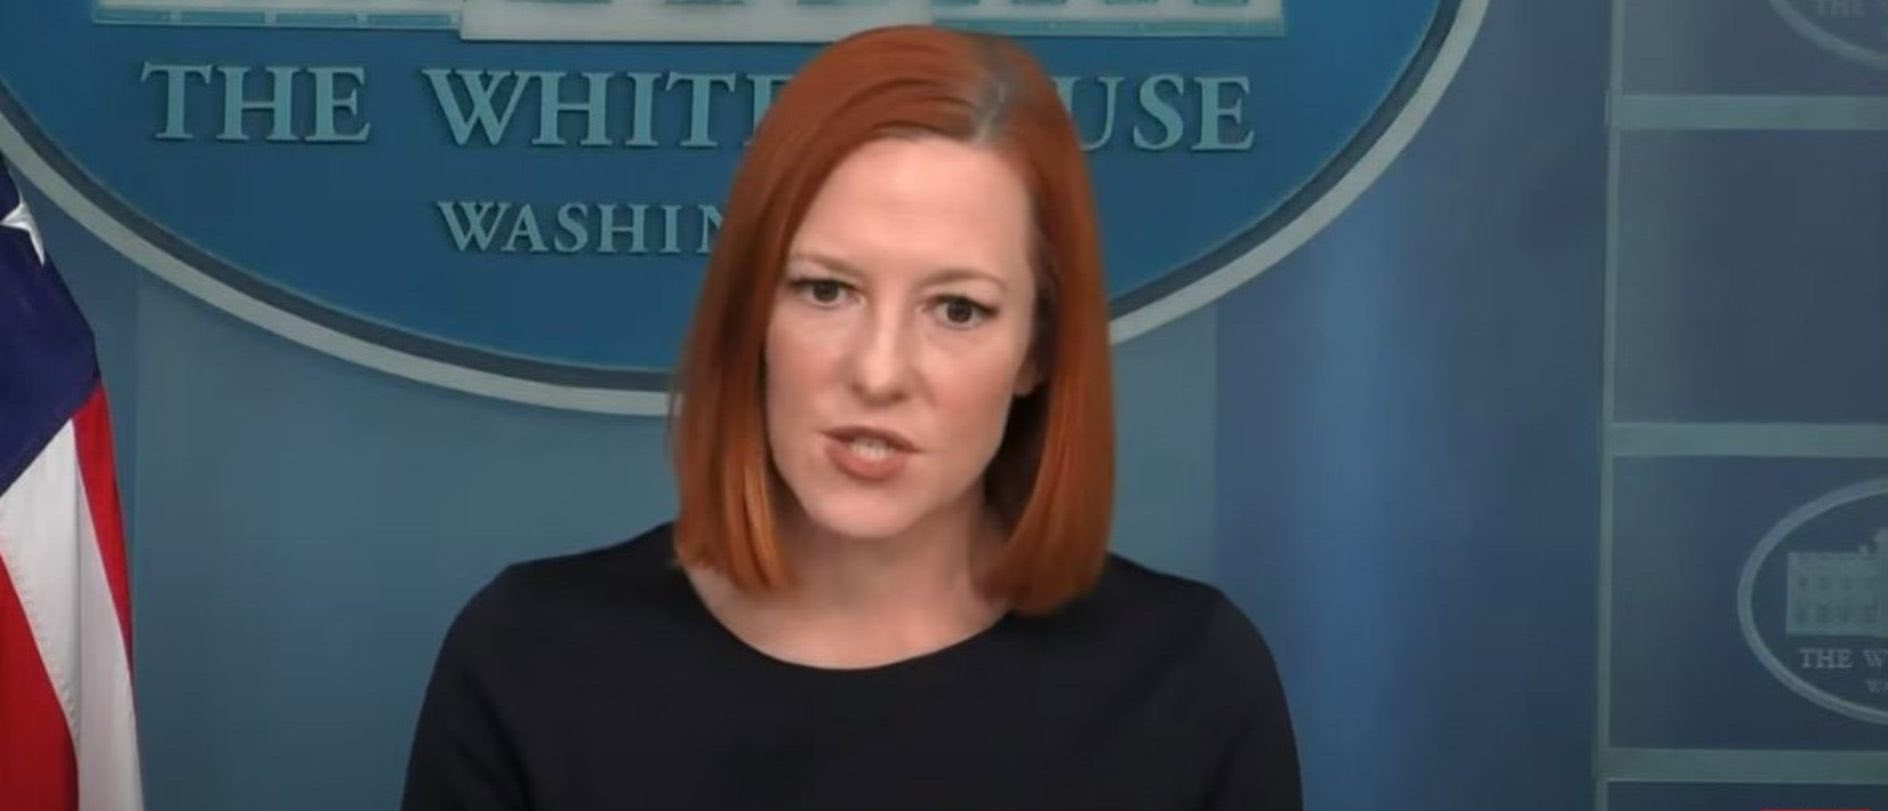 Psaki Weighs In On Joe Rogan, Says Tech Platforms Need To Be ‘Doing More’ To Curb ‘Misinformation’